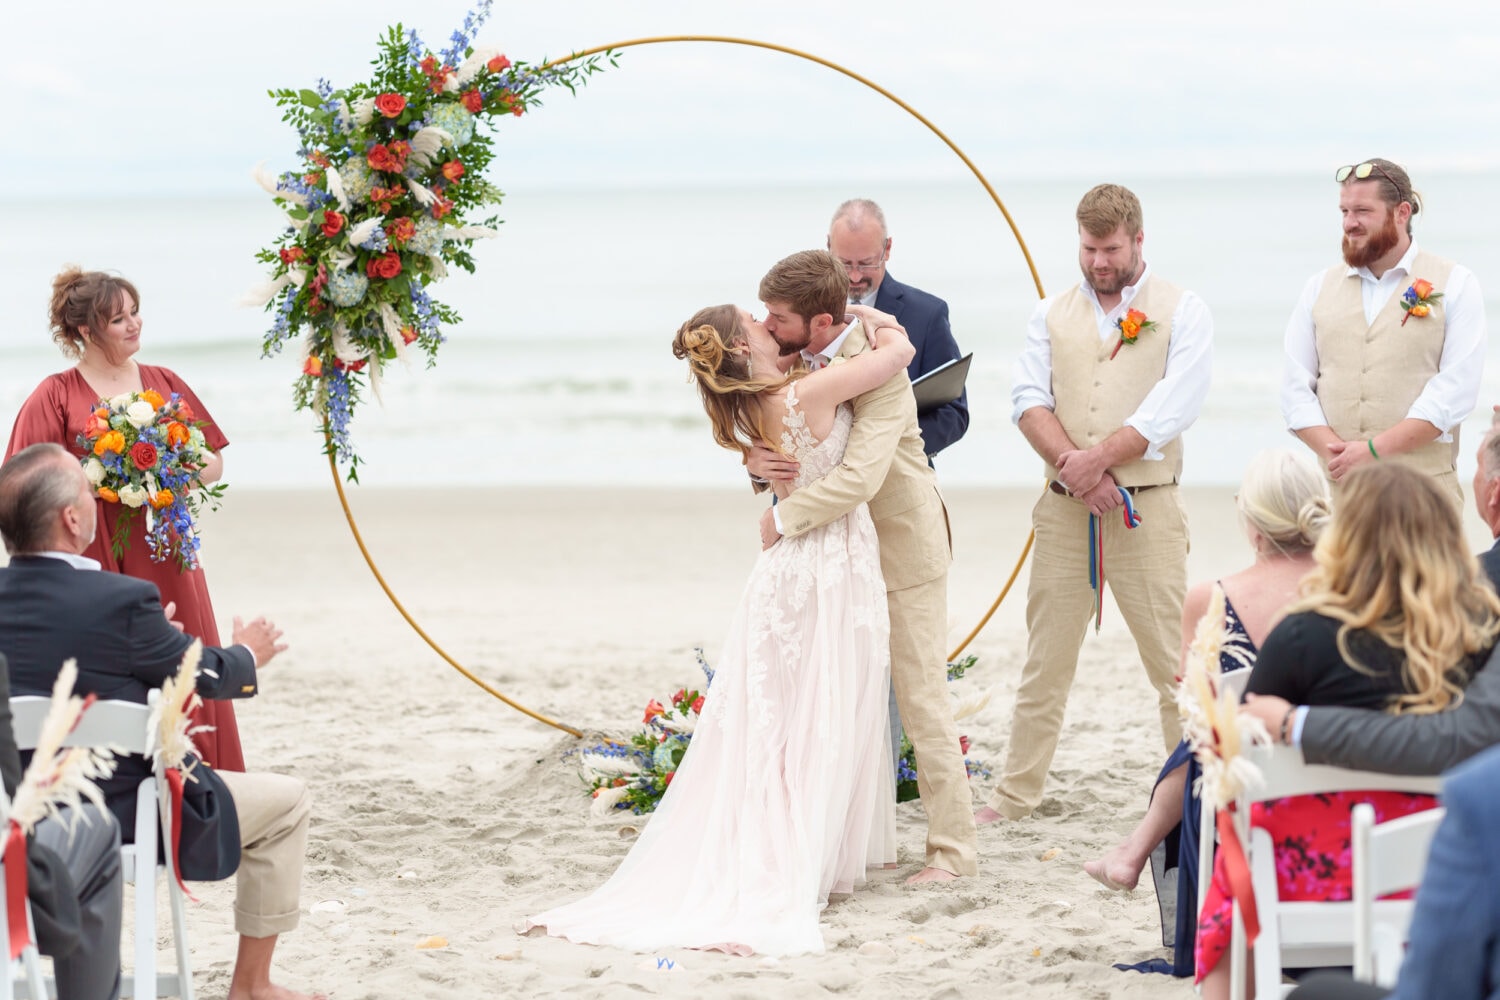 First kiss on the beach - 21 Main Events - North Myrtle Beach